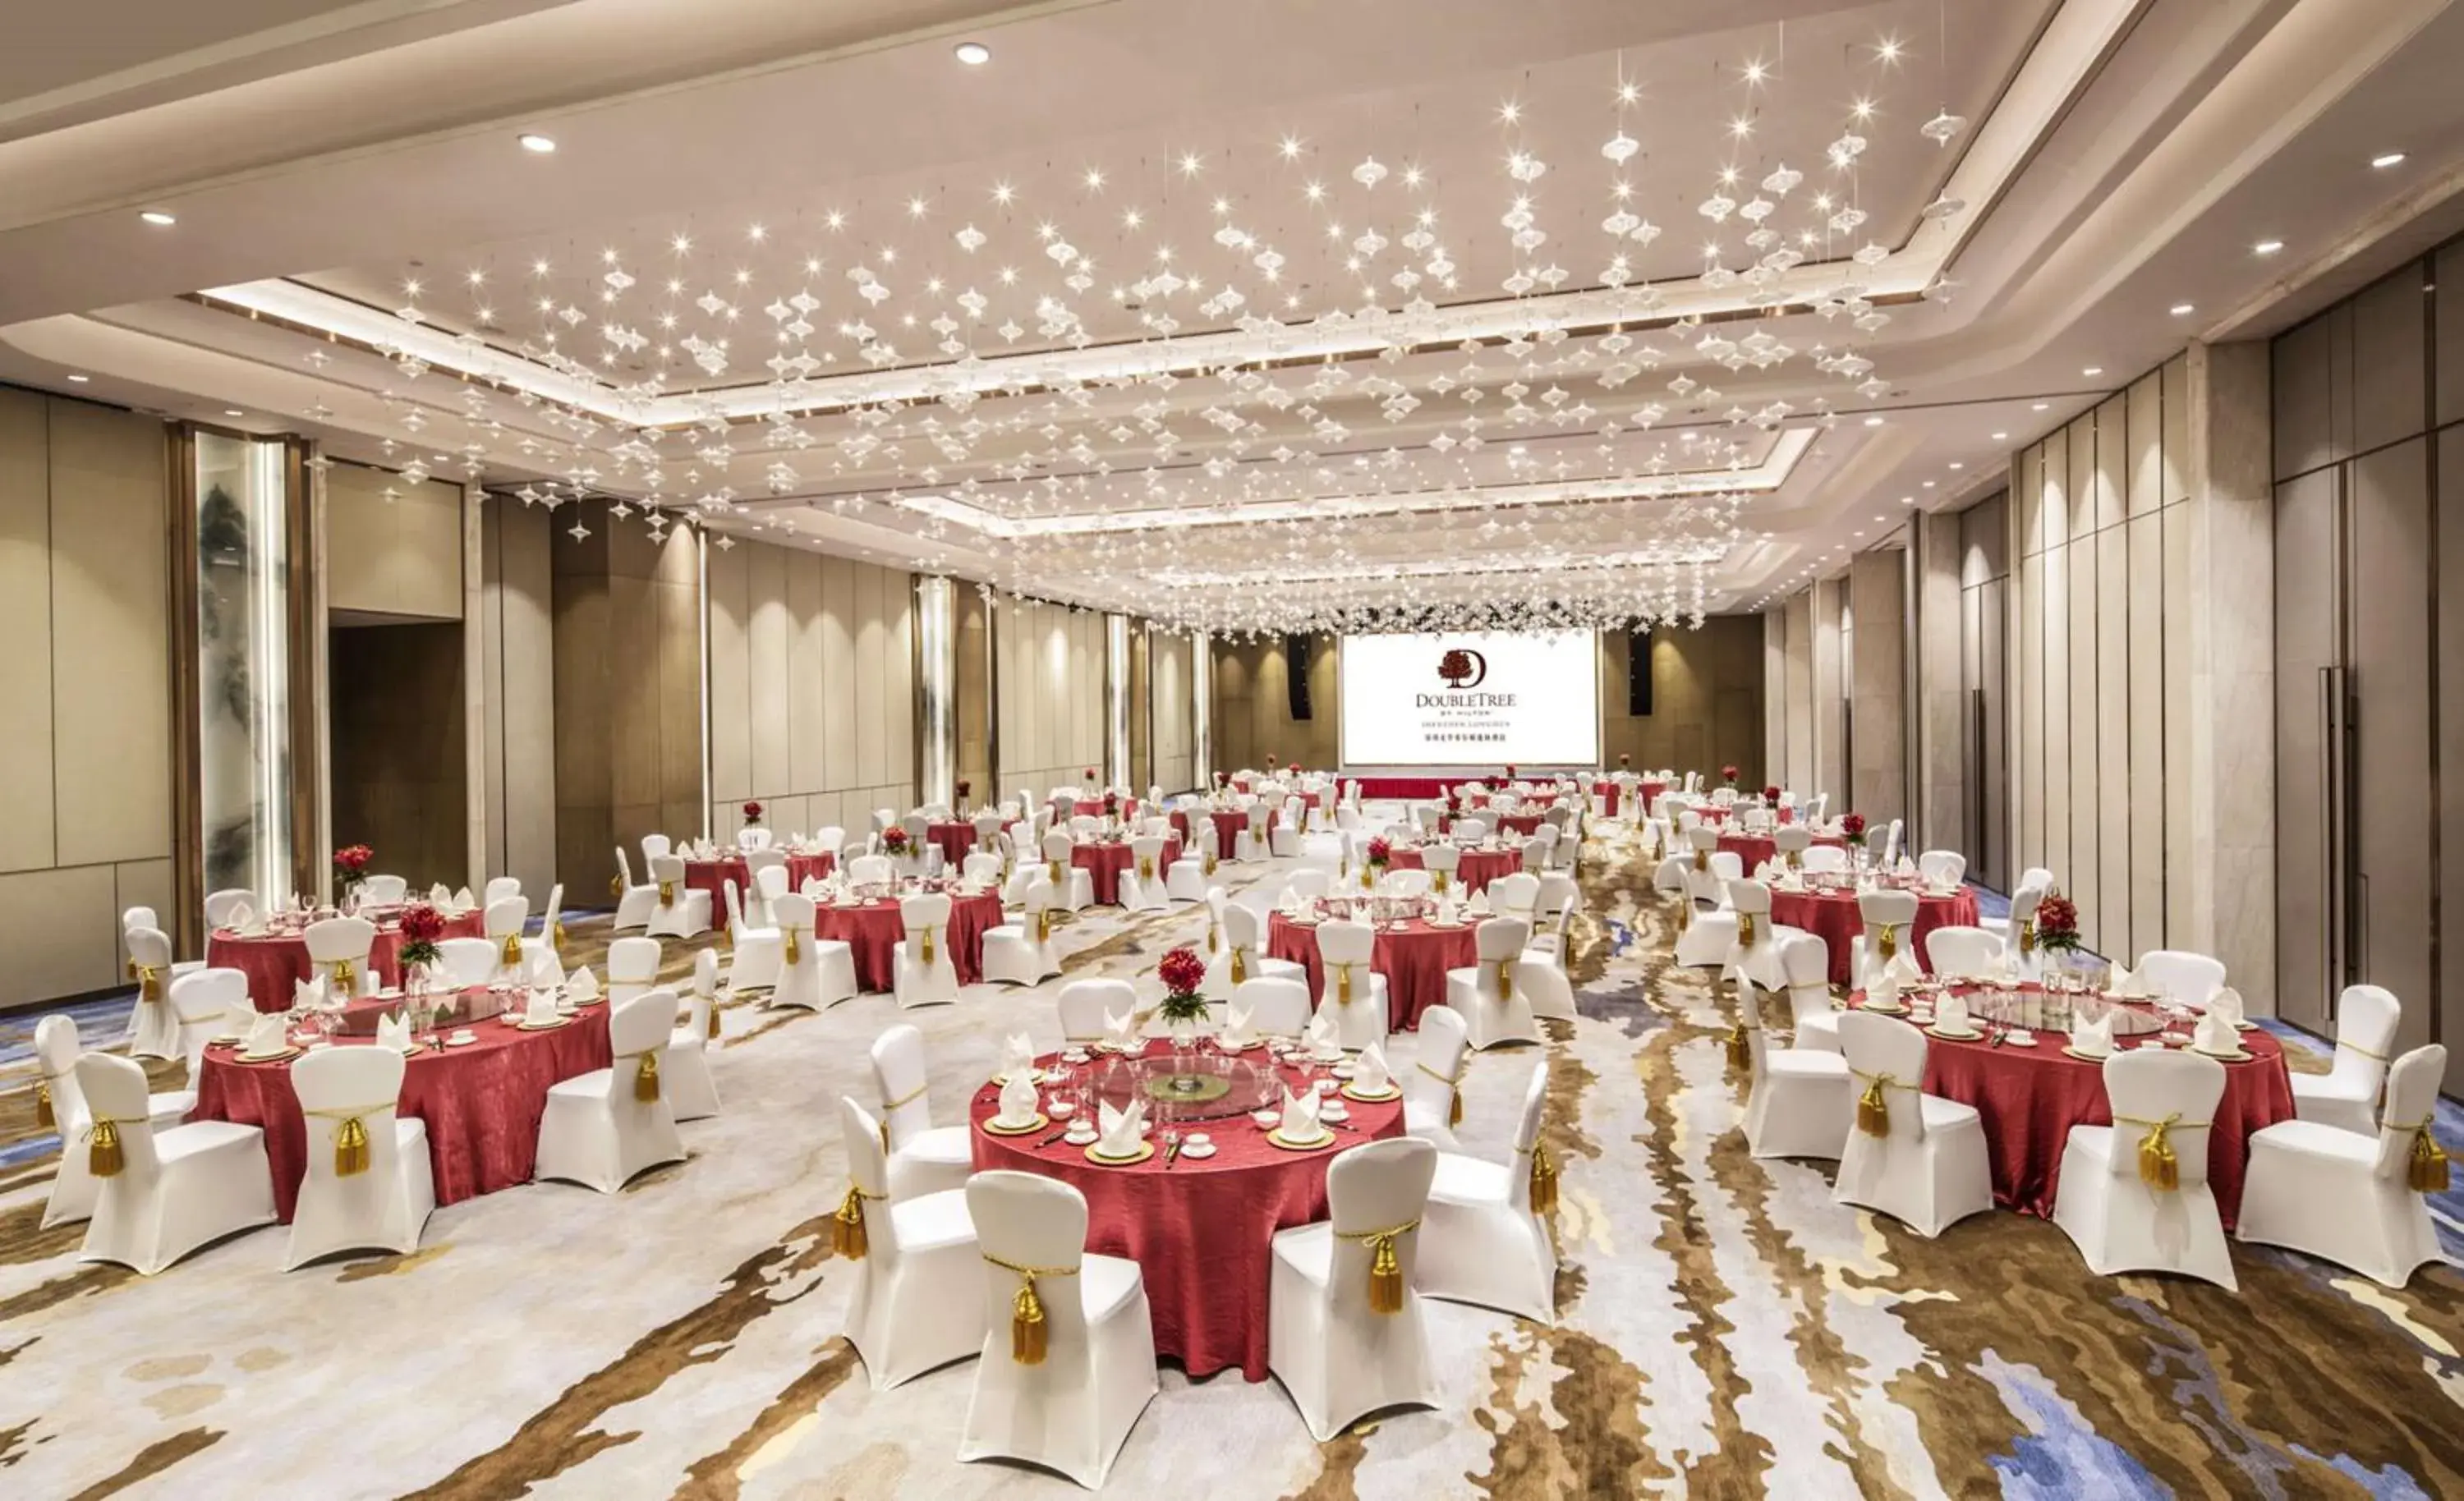 Meeting/conference room, Banquet Facilities in DoubleTree By Hilton Shenzhen Longhua